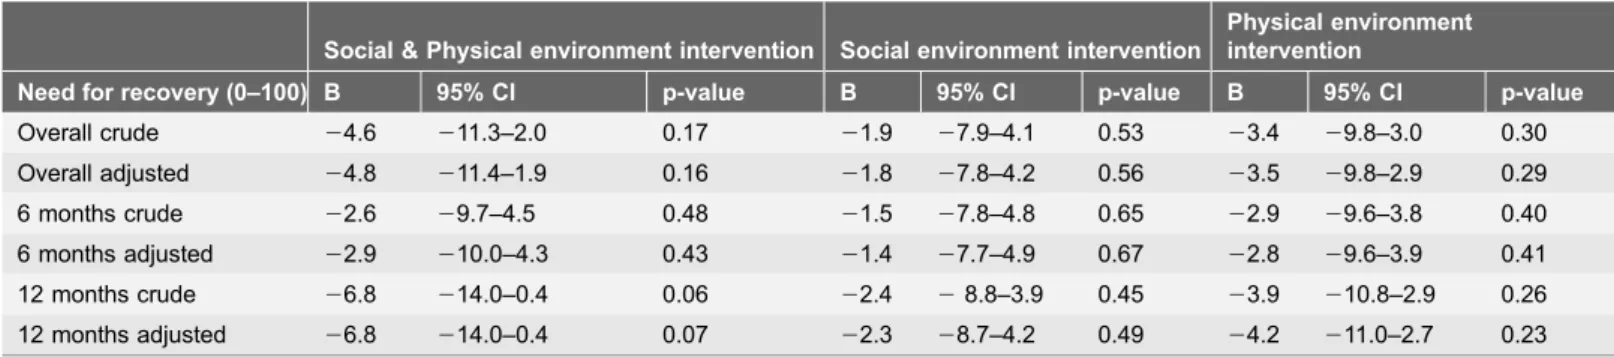 Table 3. Crude and adjusted overall effects, at 6 months and at 12 months, of need for recovery between the intervention groups and the control group.